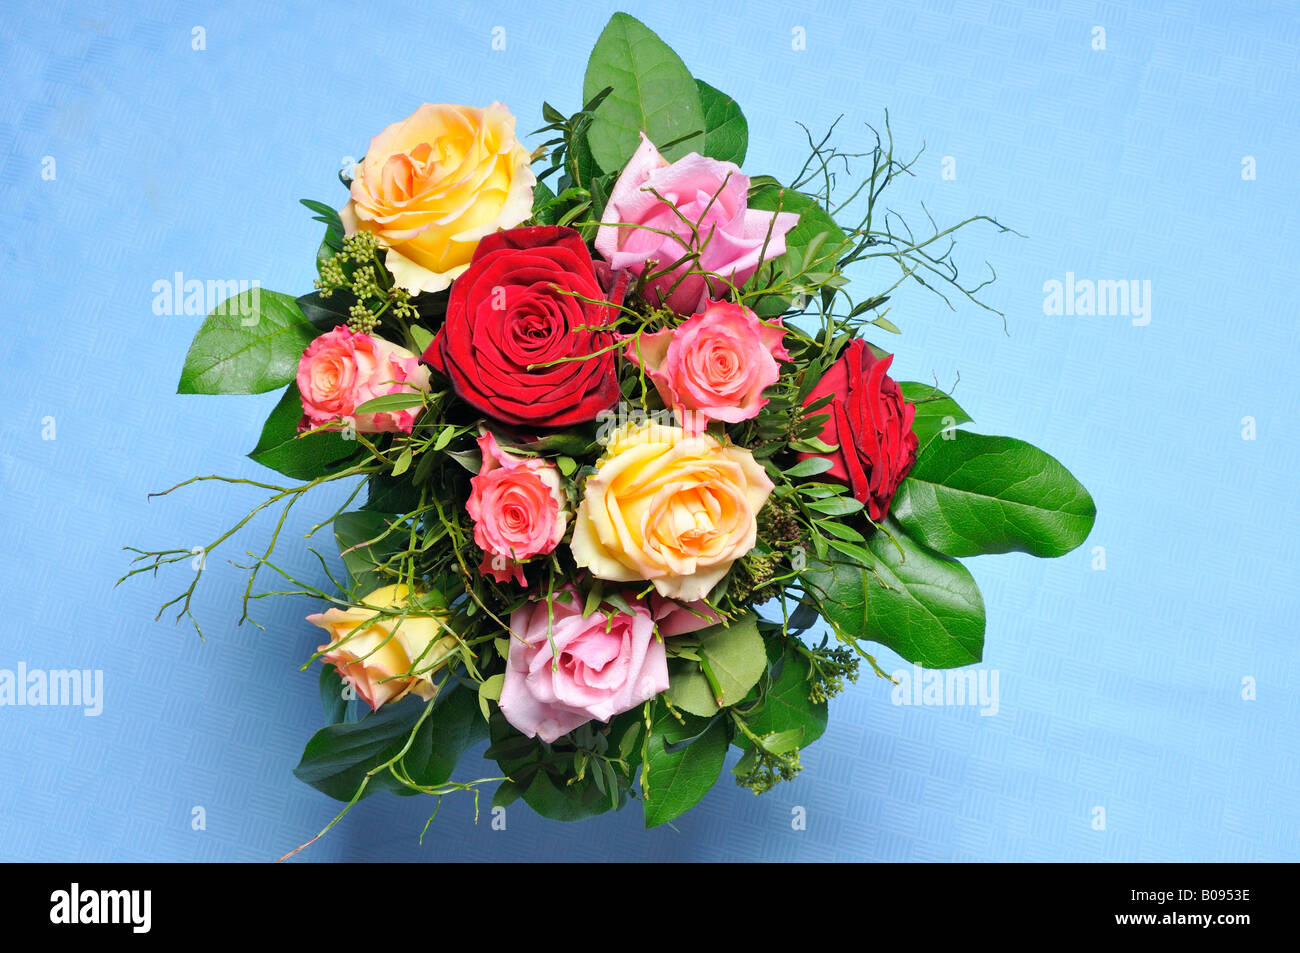 Bouquet of colourful roses set on a blue tablecloth Stock Photo